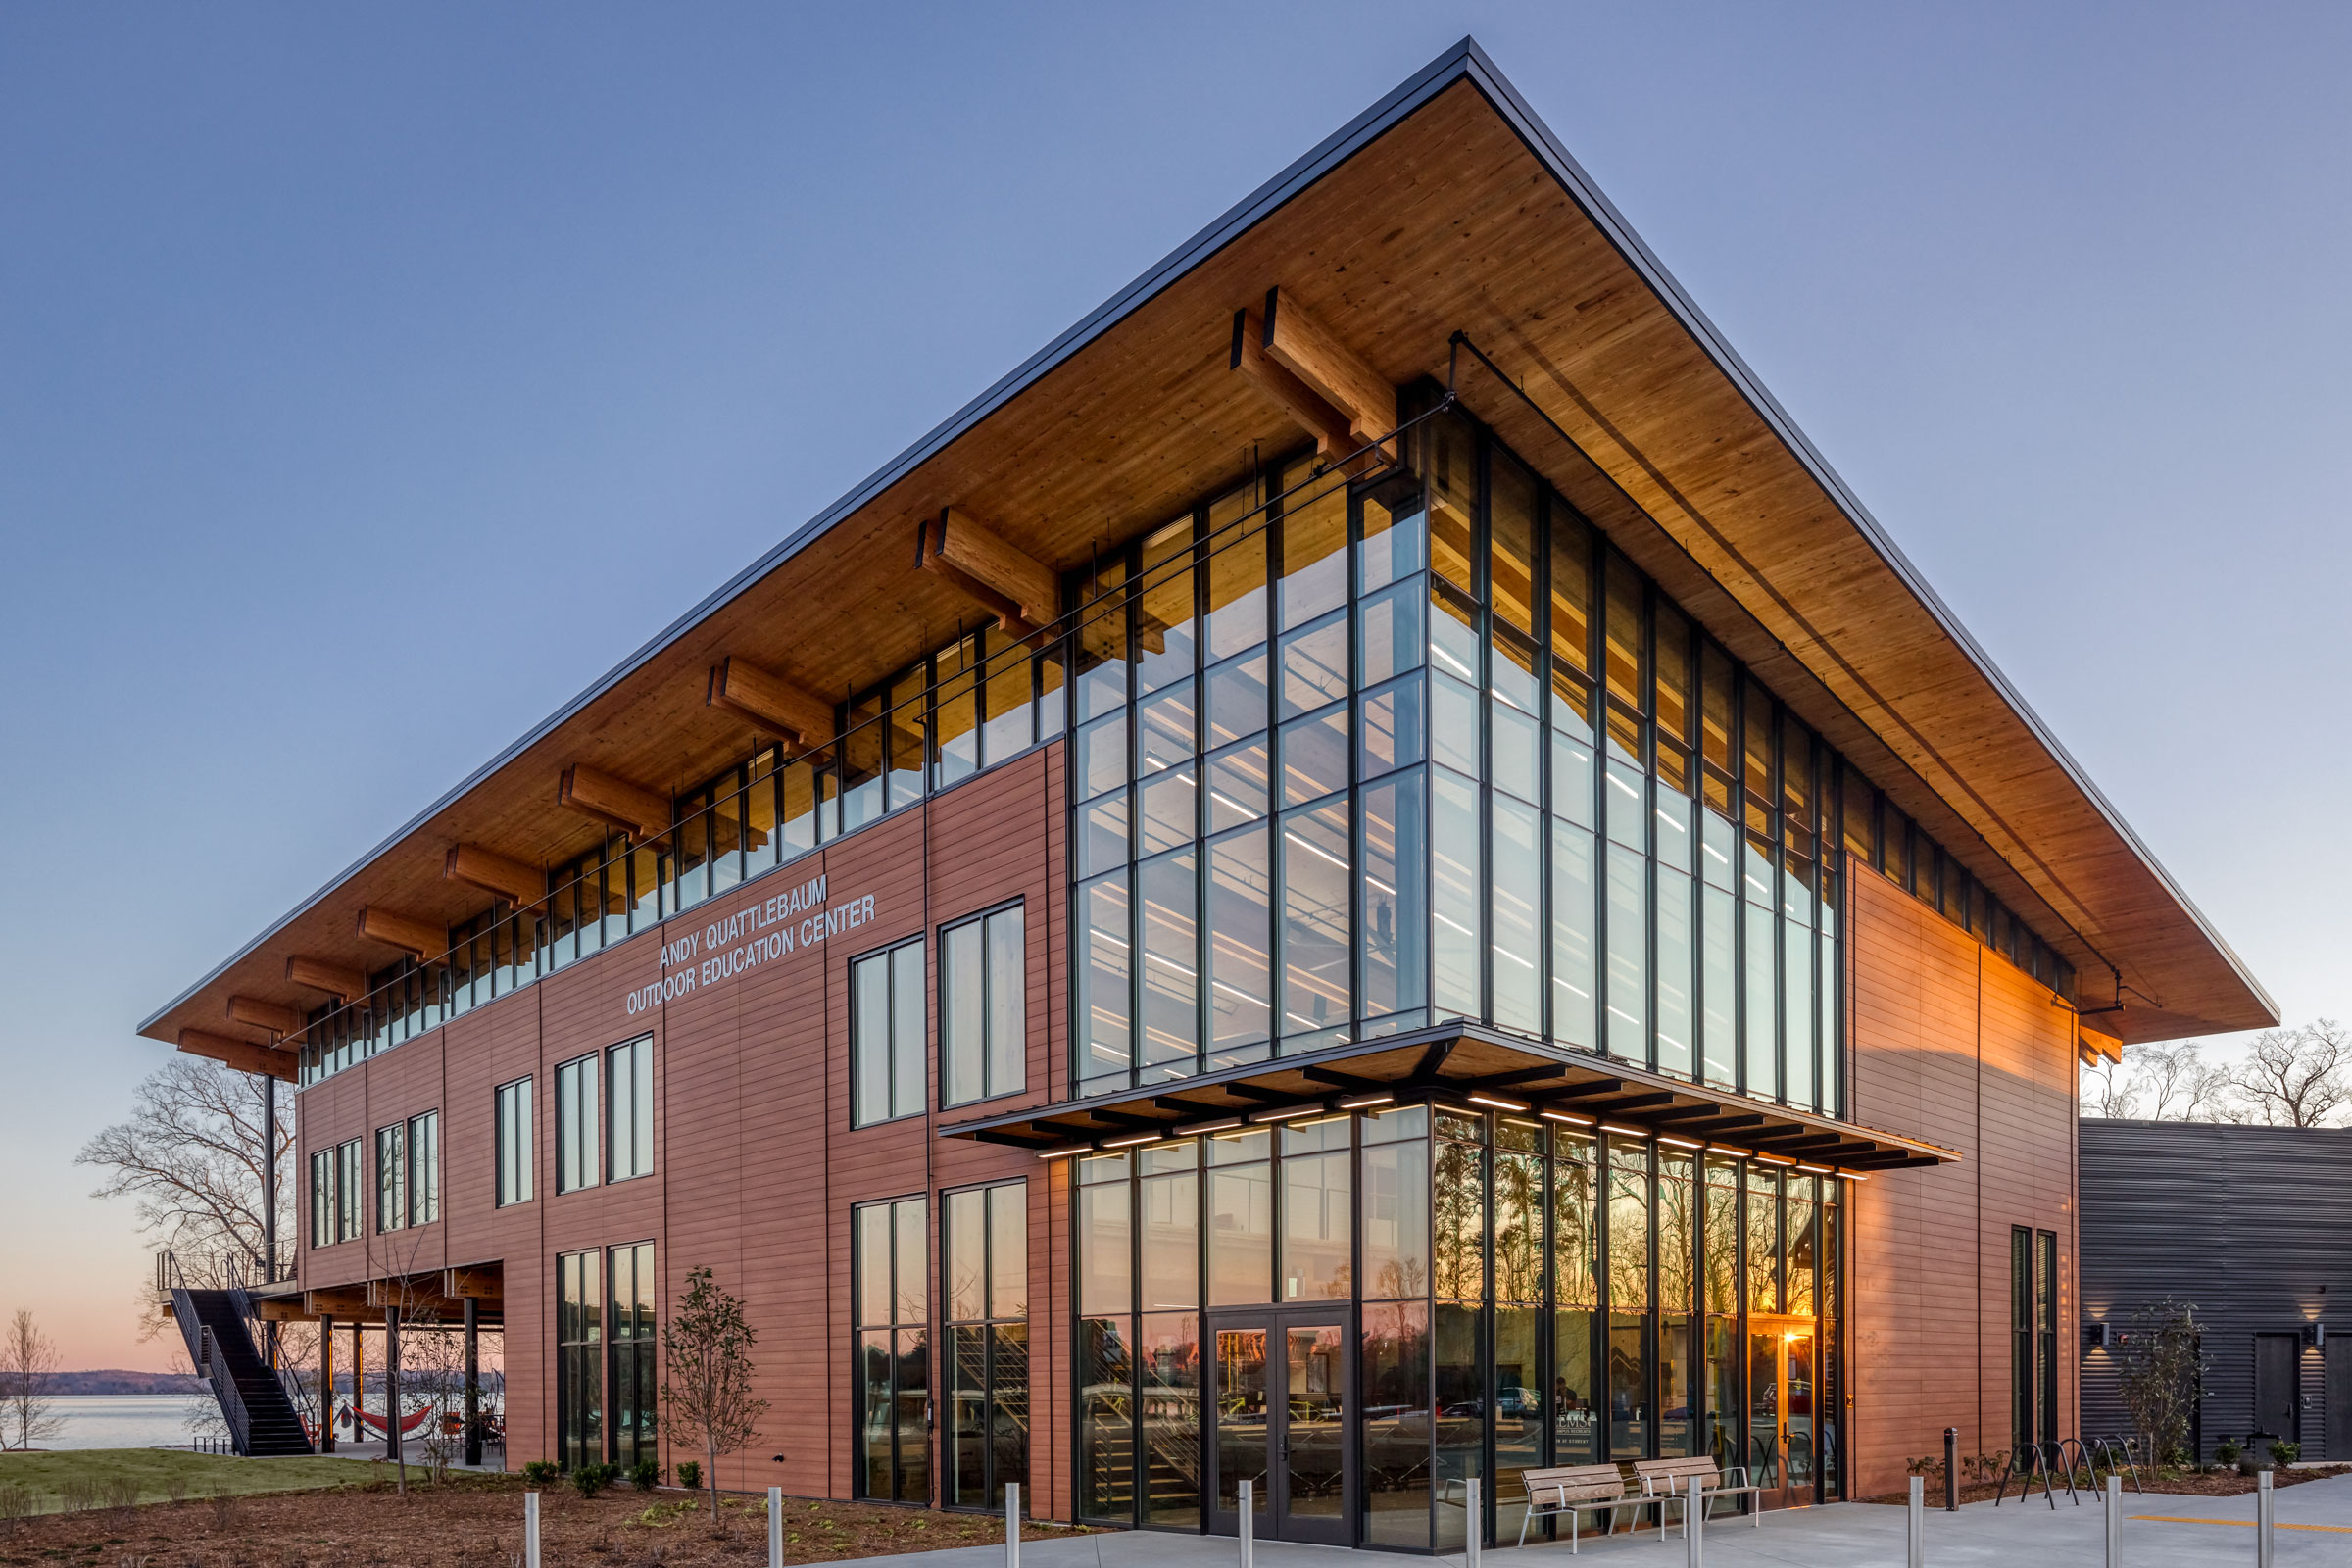 Mass Timber Made This South Carolina University Project an Example for the Region